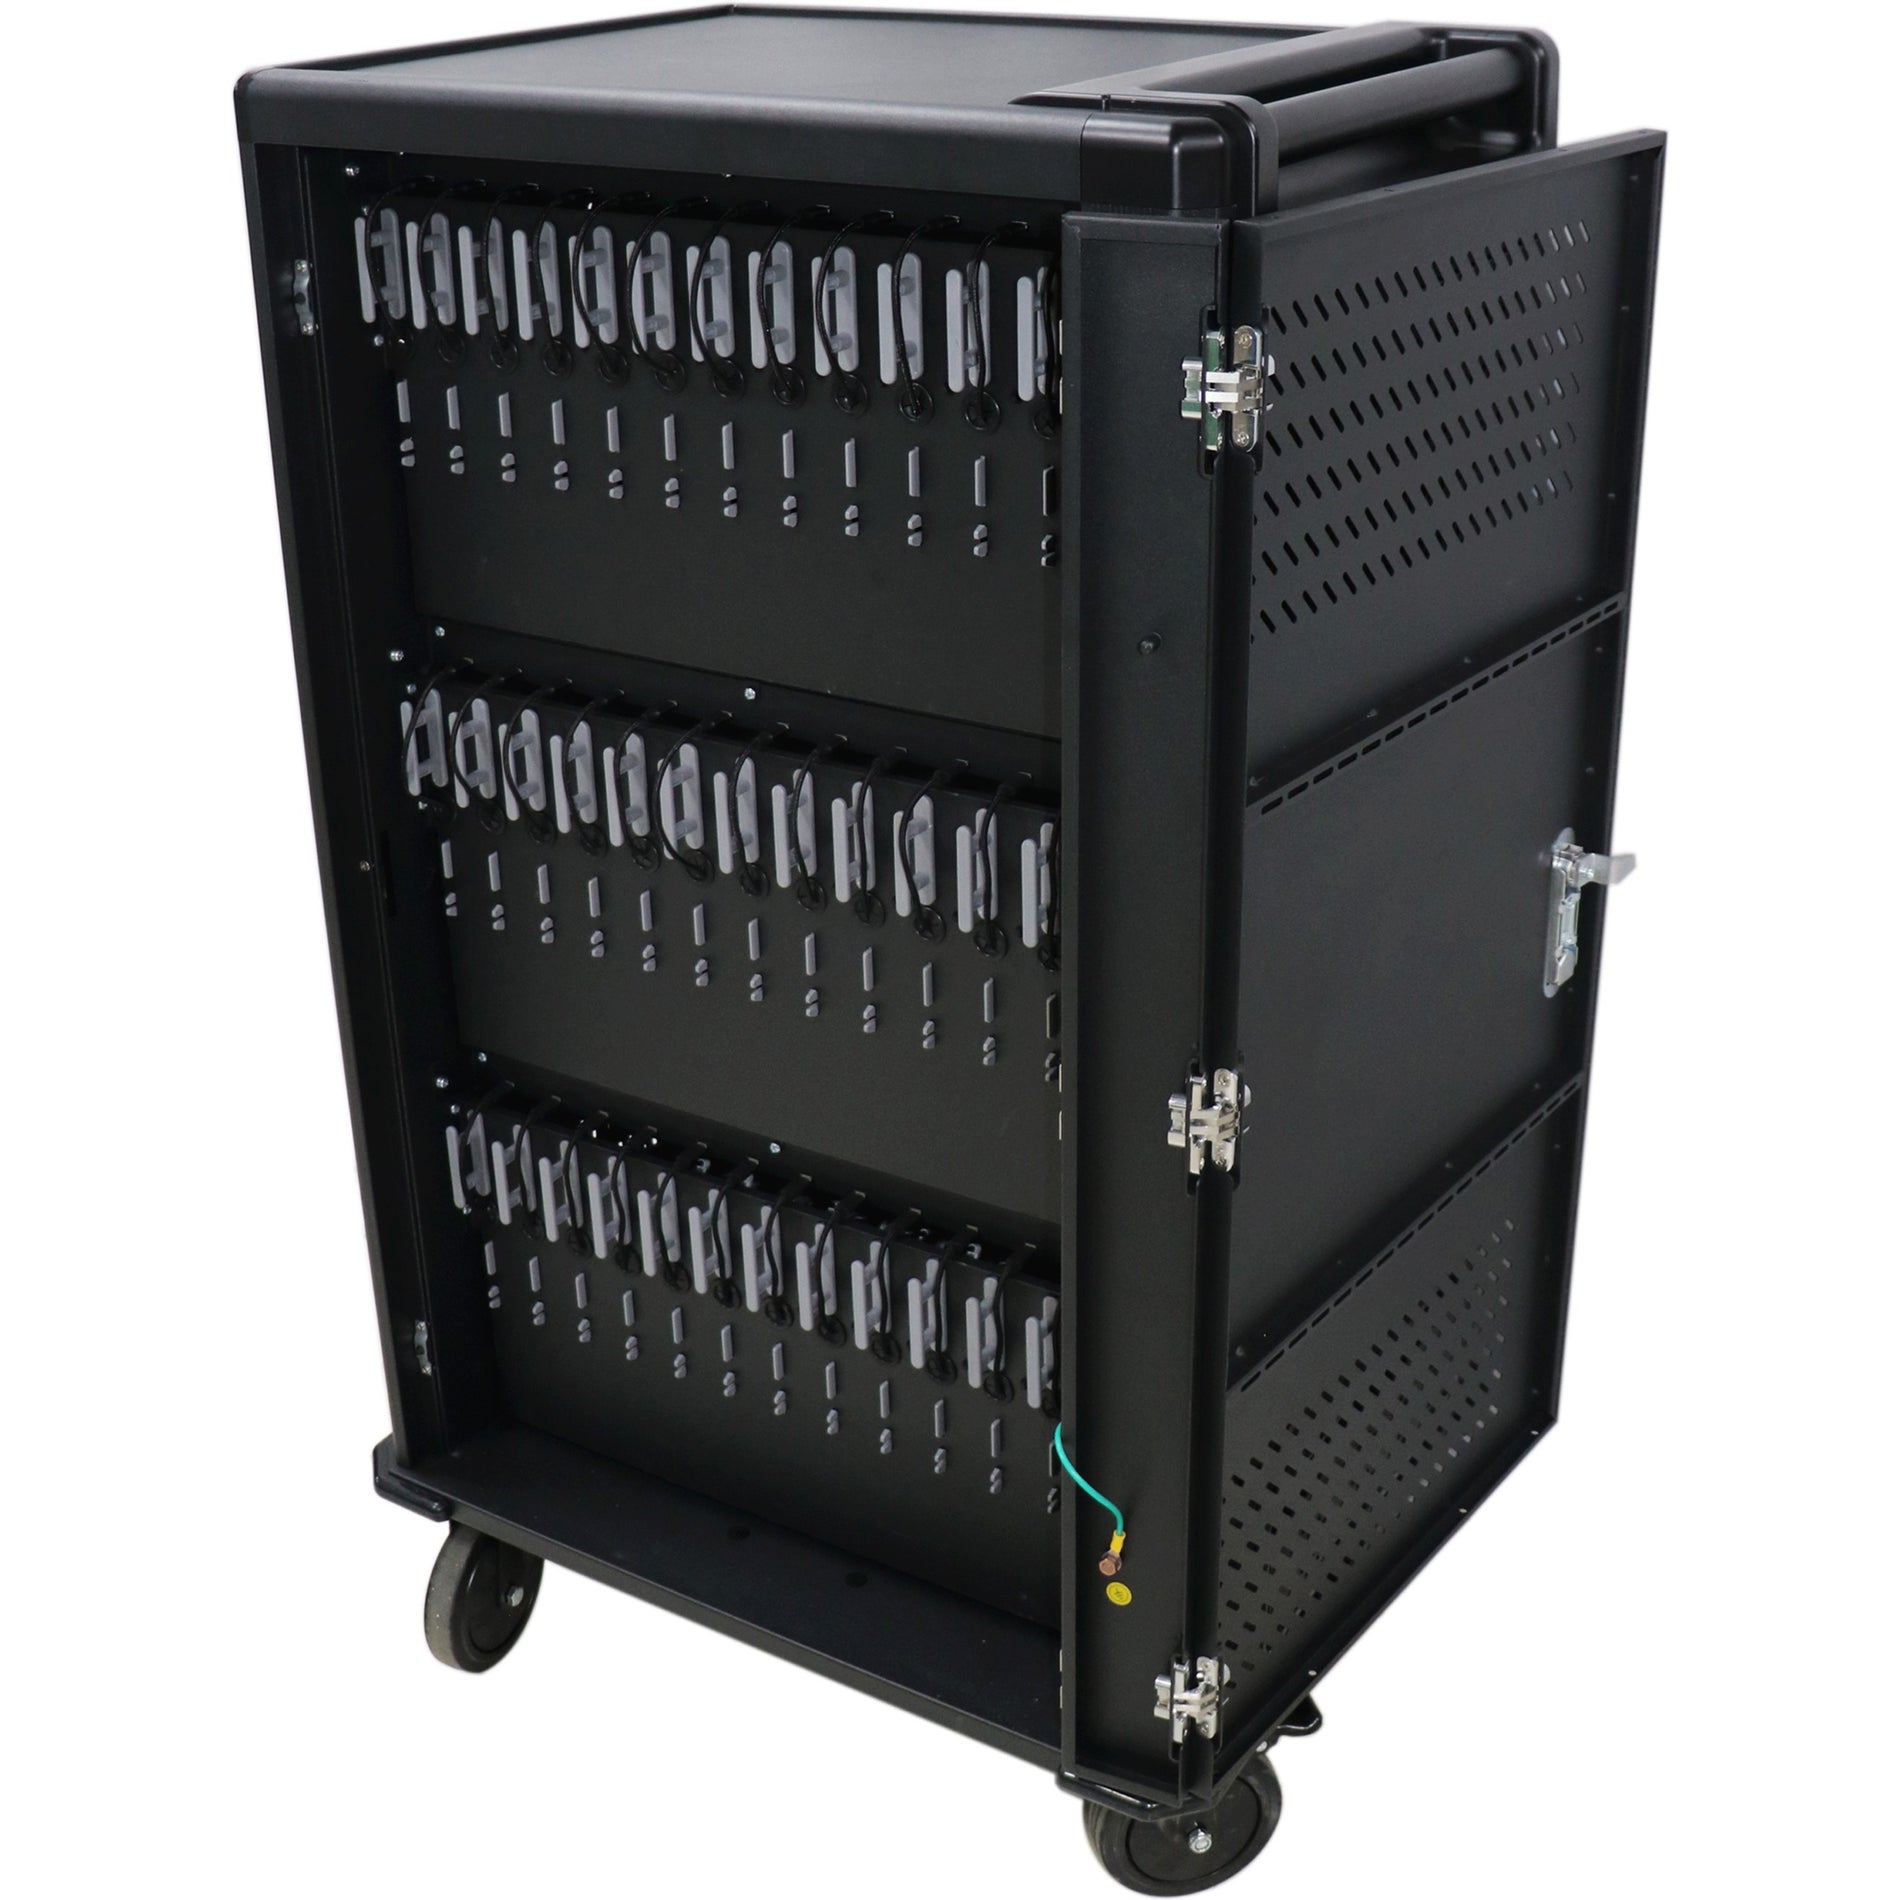 V7 CHGCT36USBCPD-1N Charge Carts - 36 Devices USB-C PD Prewired US Power, 5 Year Warranty, RoHS Certified